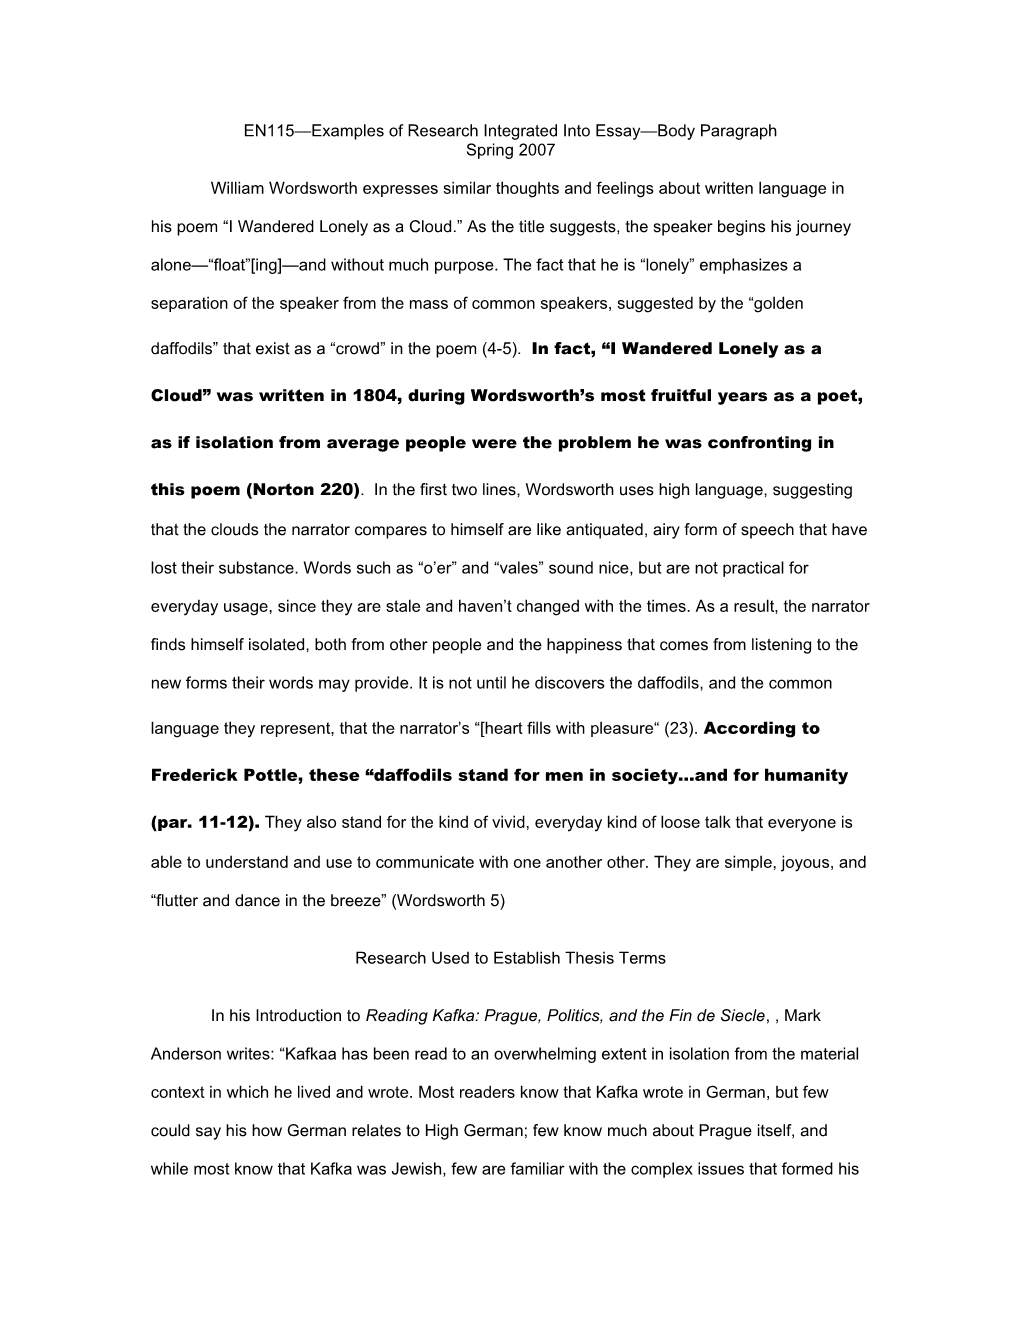 EN115 Sample Research Integrated Body Paragraph